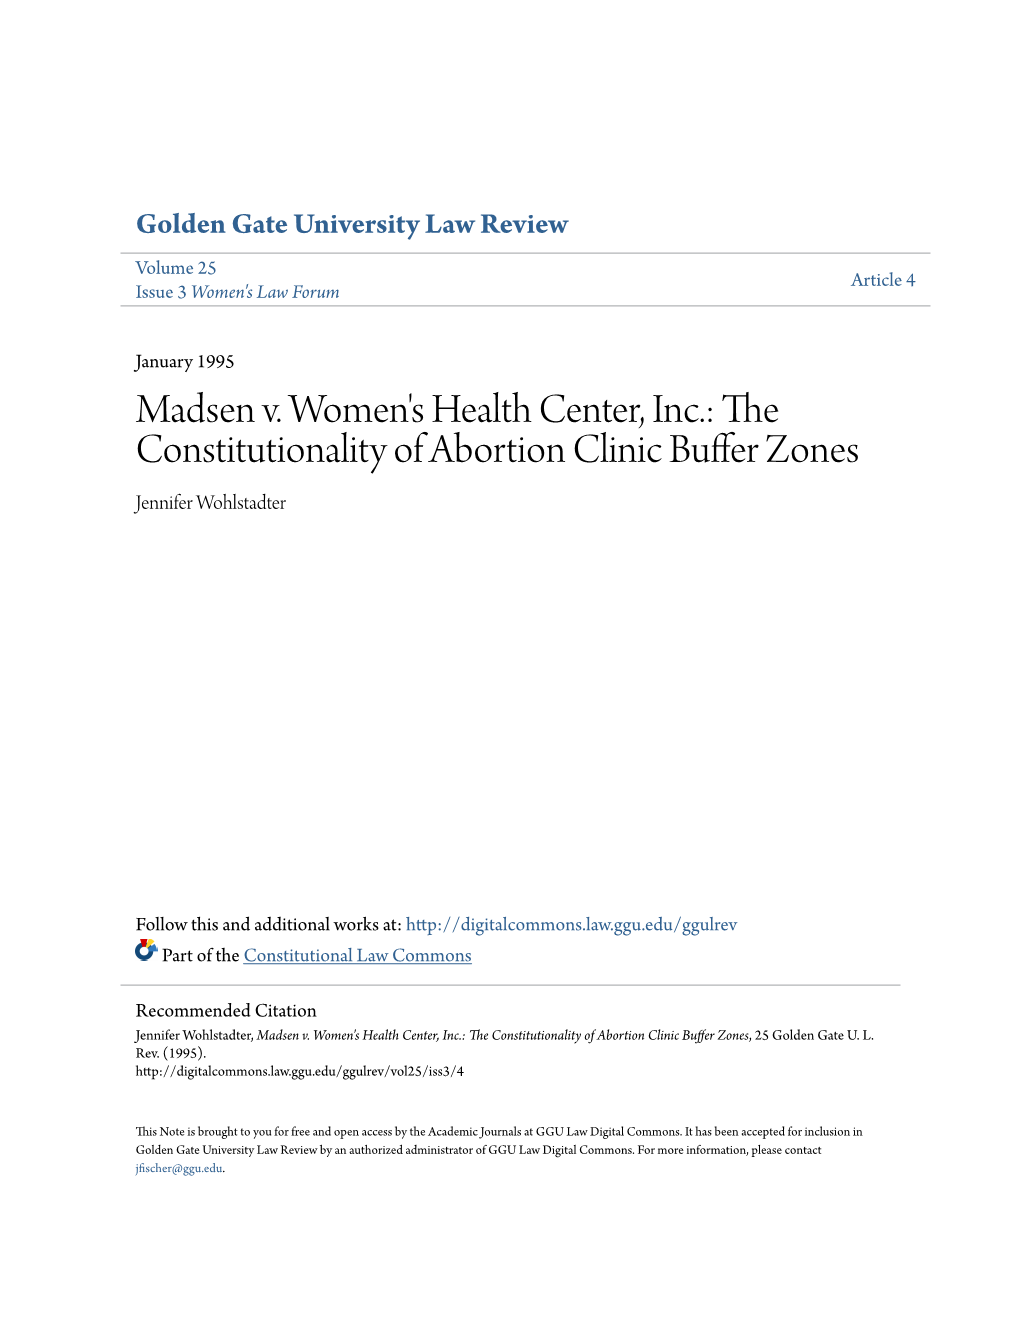 The Constitutionality of Abortion Clinic Buffer Zones Jennifer Wohlstadter